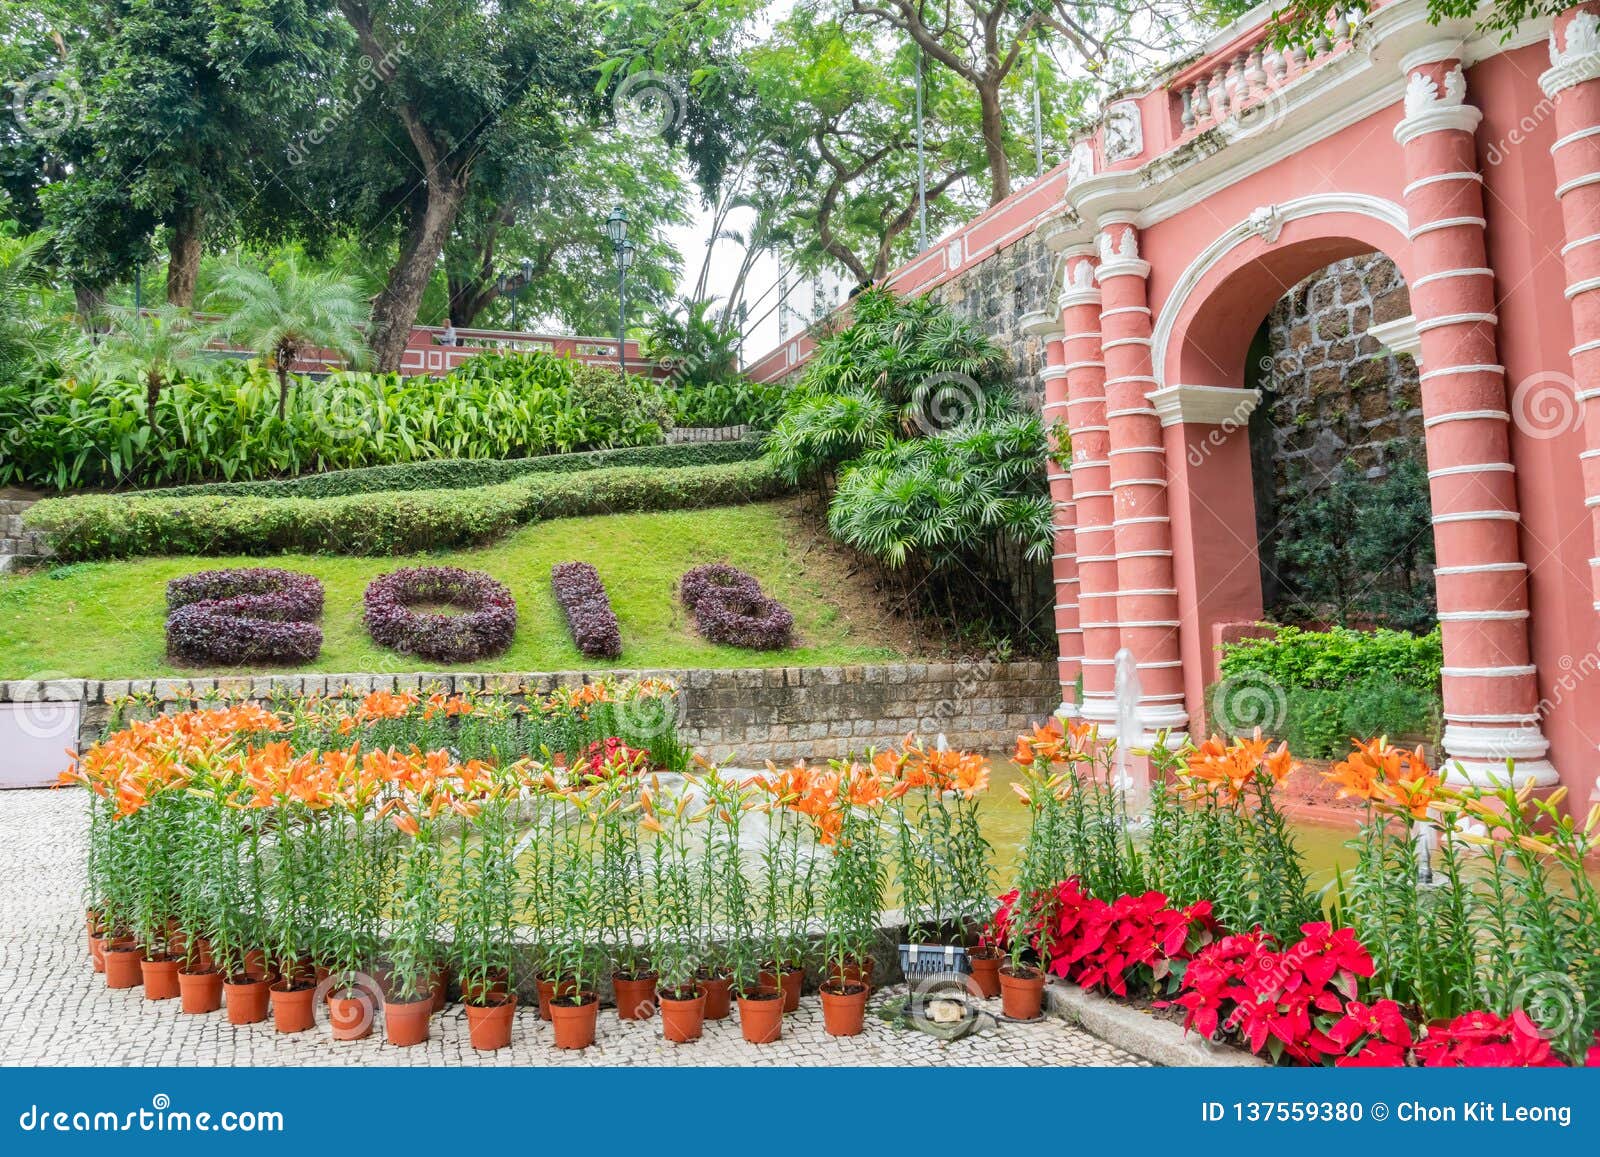 montanha russa garden with lily and poinsettia blossom